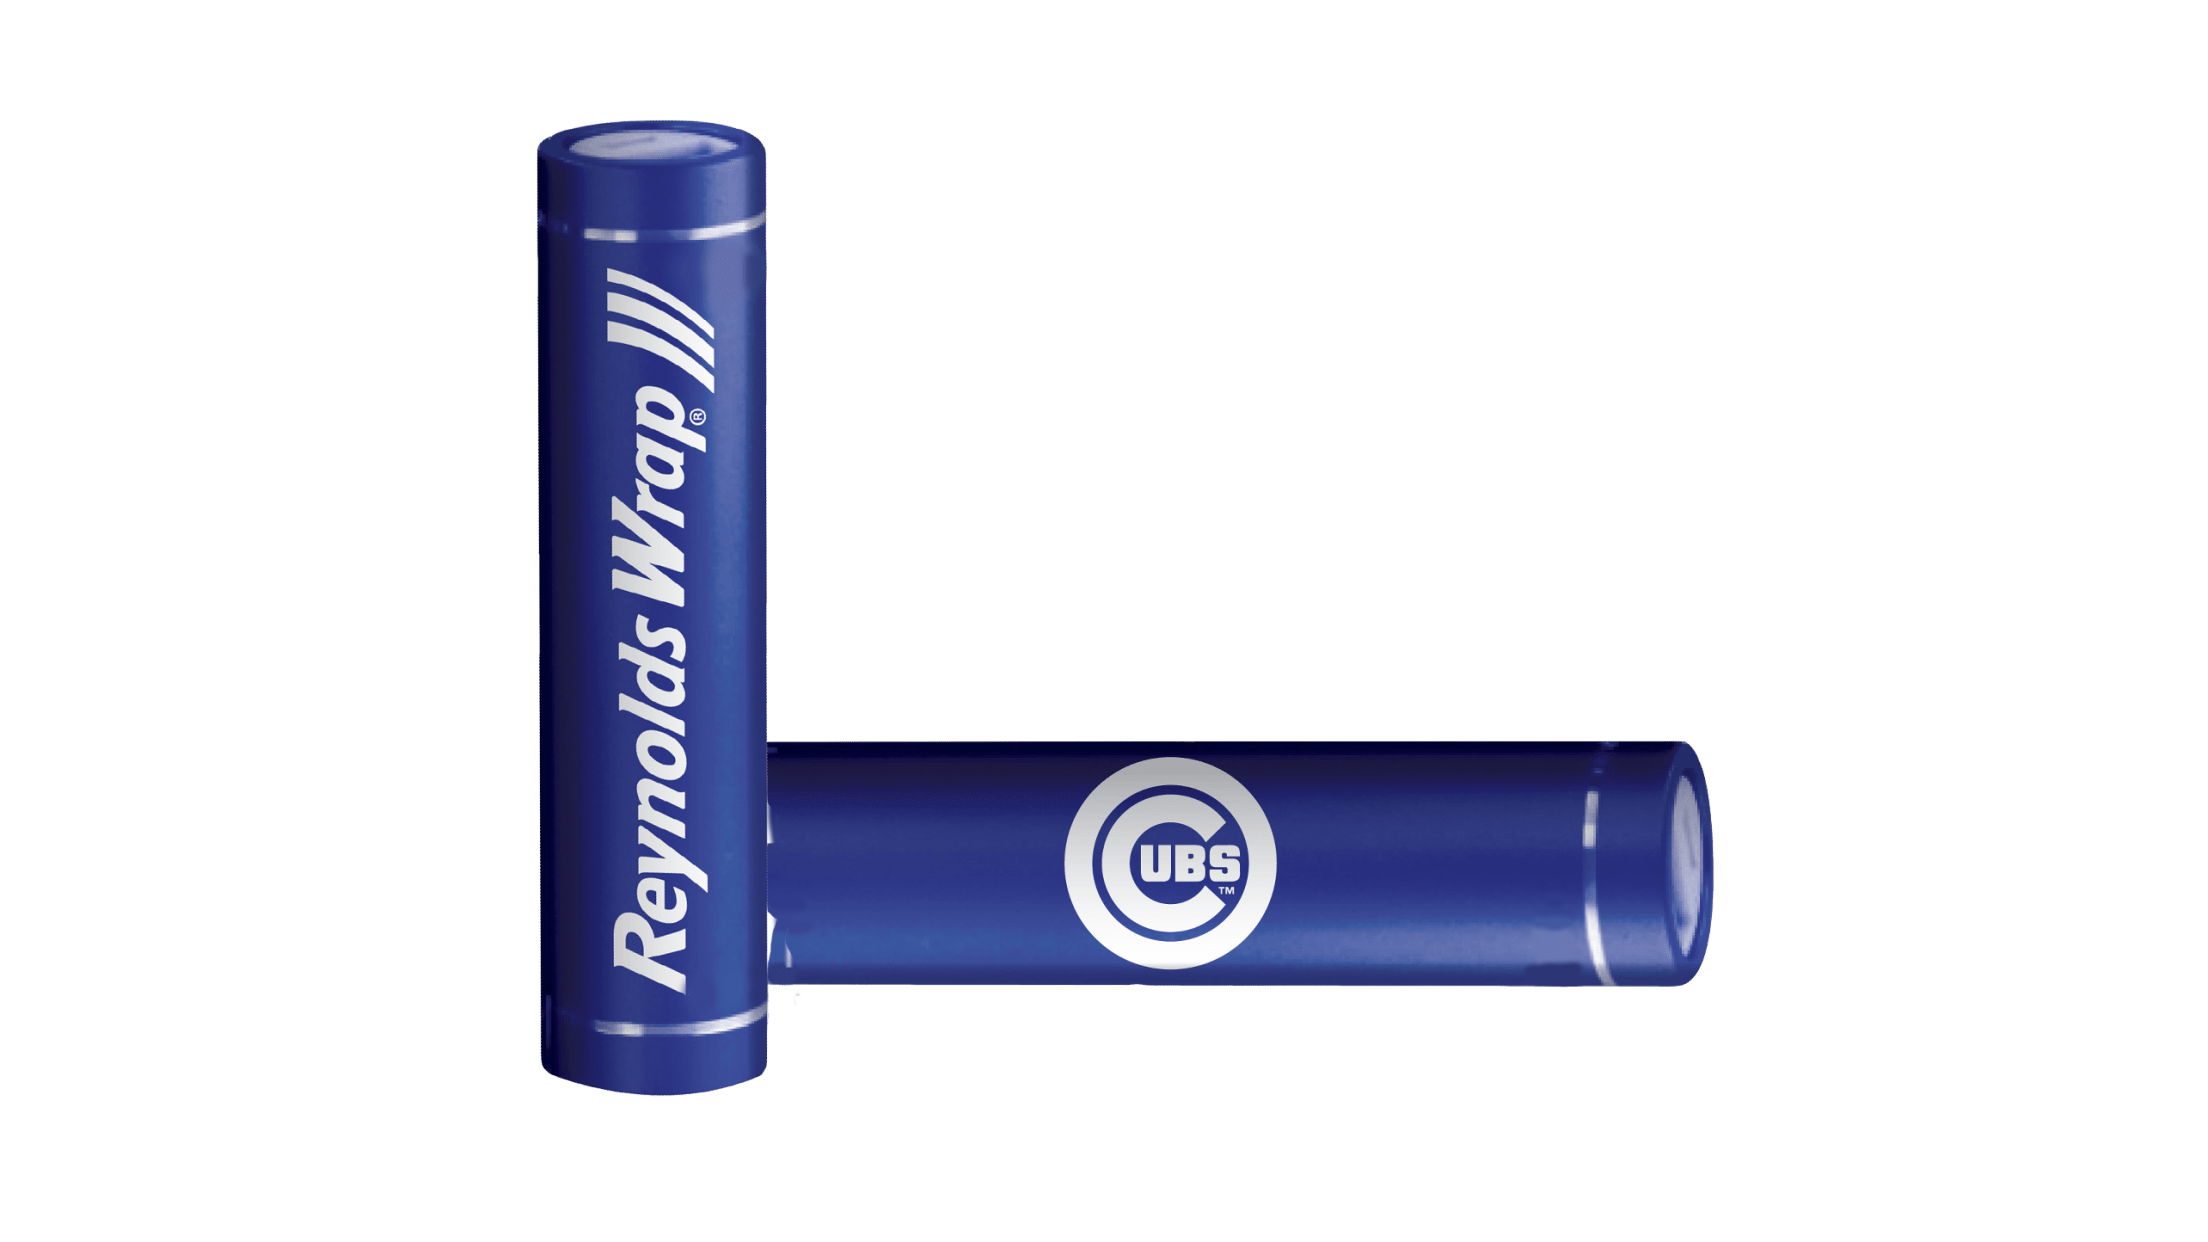 2024 Promotions and Giveaways Chicago Cubs